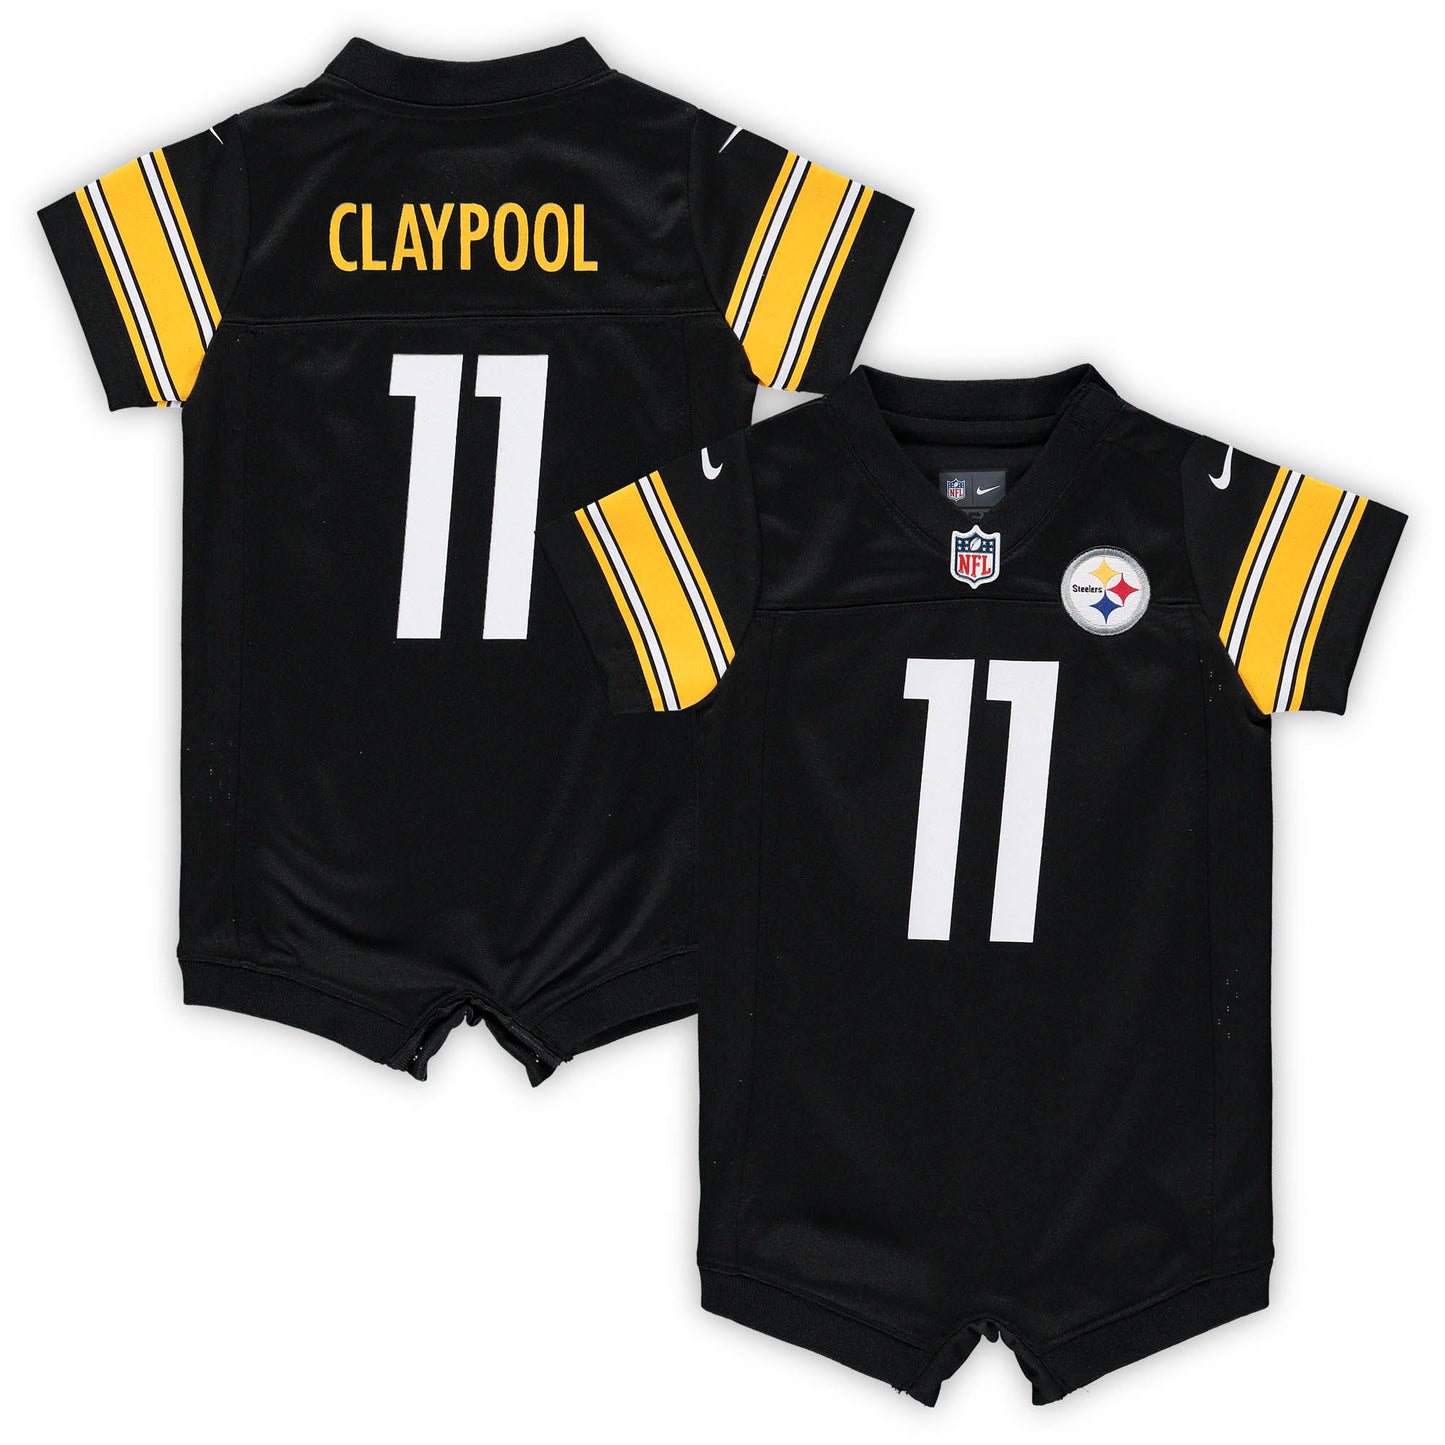 Chase Claypool Pittsburgh Steelers Nike Infant Game Romper Jersey - Black